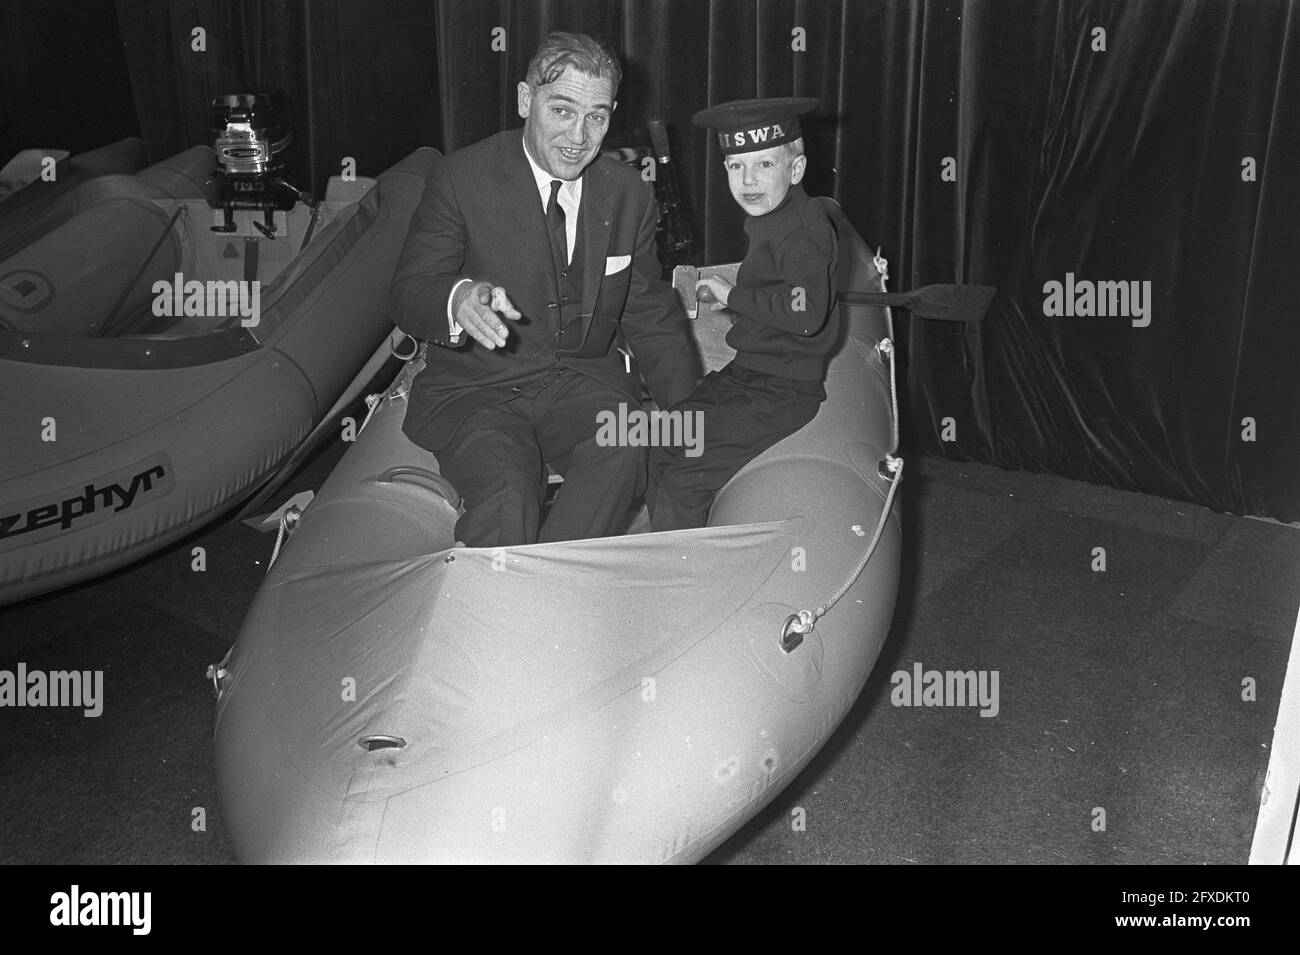 State Secretary drs. L. J. M. van Son opened Hiswa, State Secretary van Son and Michiel van Lith in inflatable rubber boat, March 10, 1967, openings, The Netherlands, 20th century press agency photo, news to remember, documentary, historic photography 1945-1990, visual stories, human history of the Twentieth Century, capturing moments in time Stock Photo